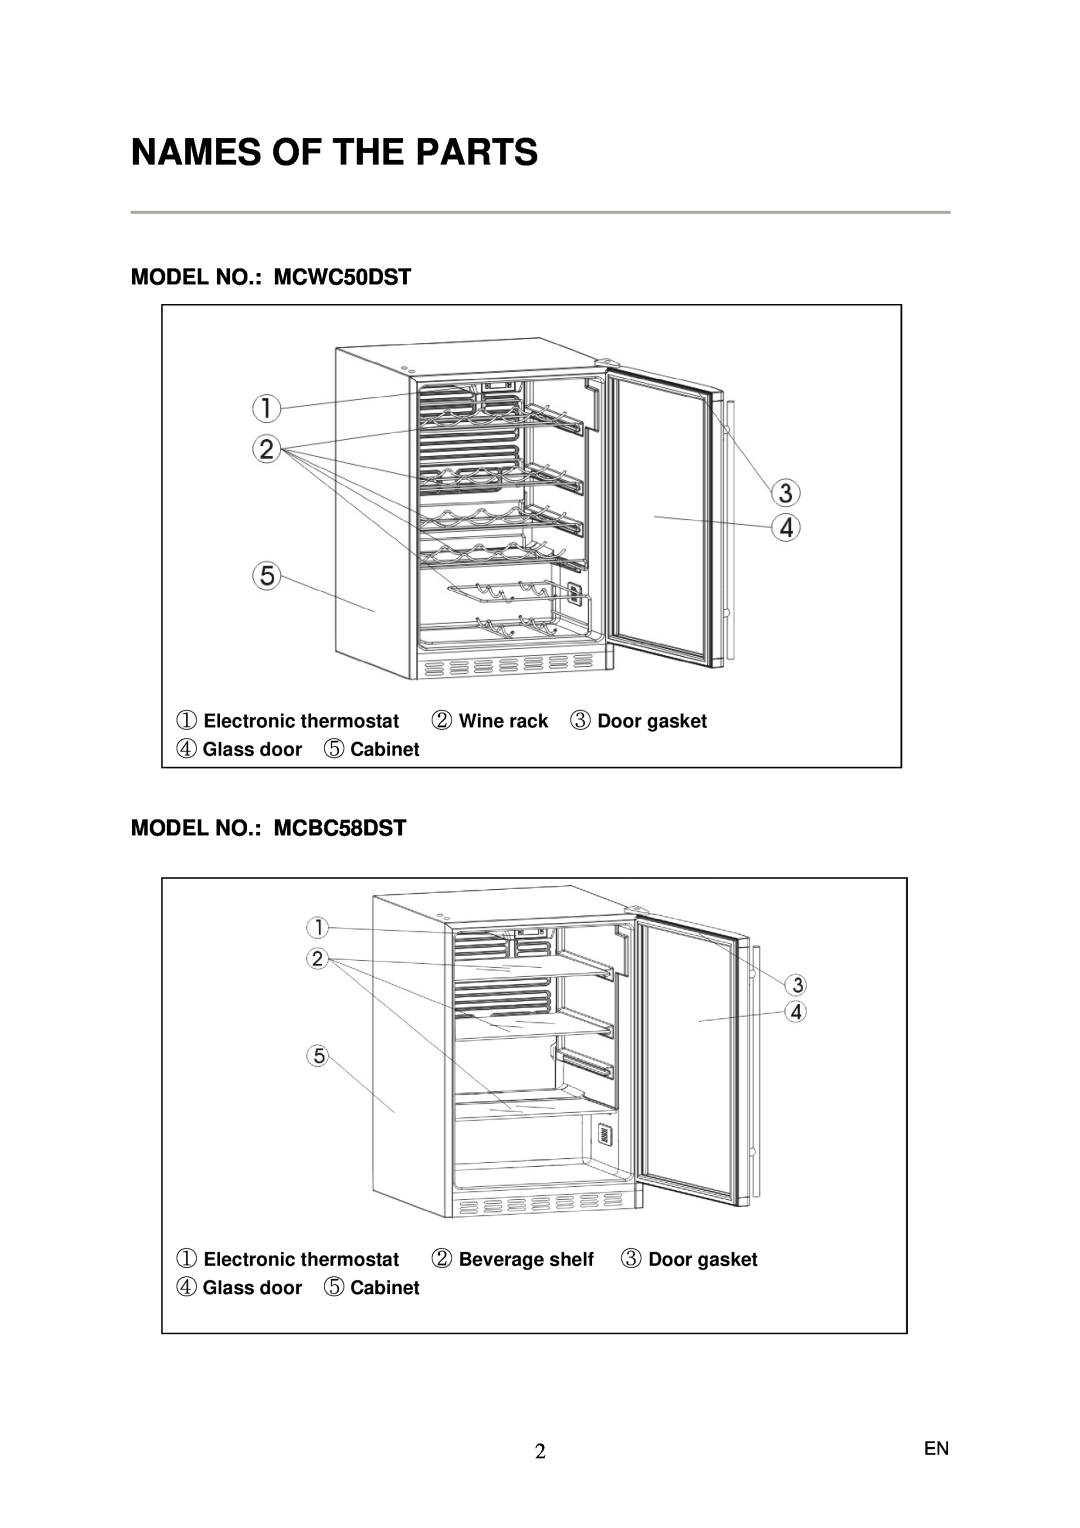 Magic Chef instruction manual Names Of The Parts, MODEL NO. MCWC50DST, MODEL NO. MCBC58DST, ④ Glass door ⑤ Cabinet 